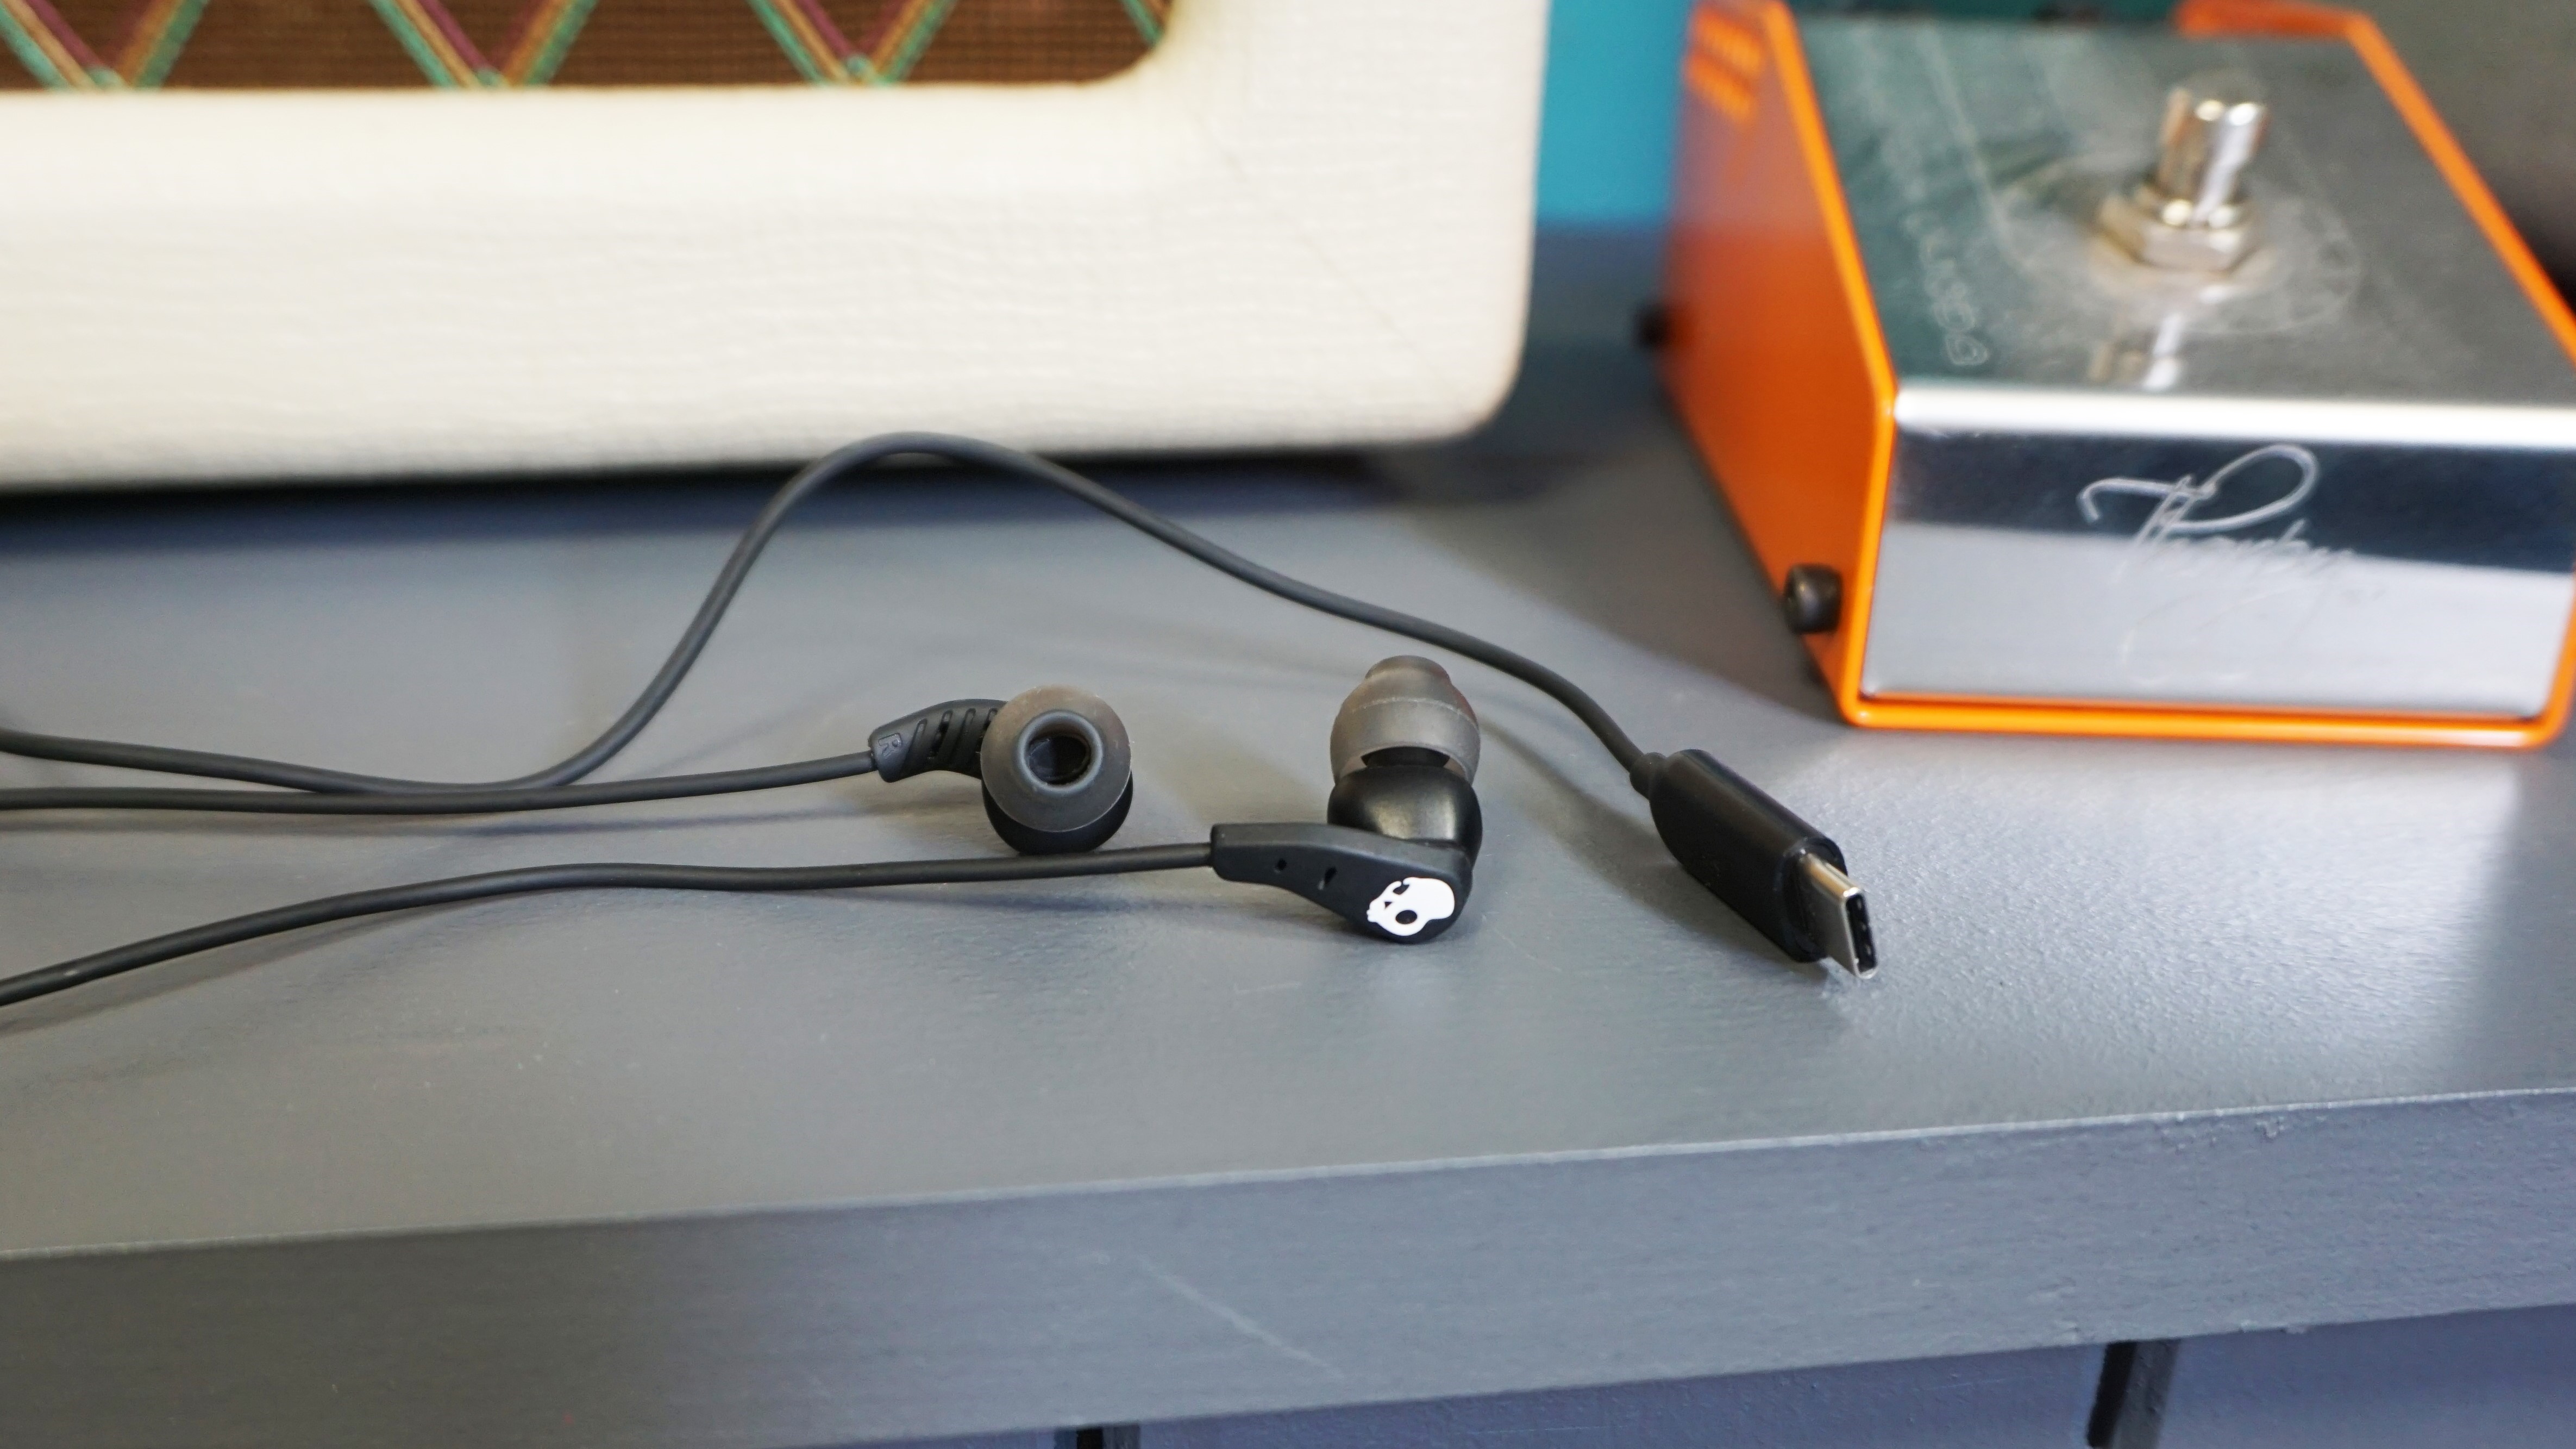 Skullcandy Set USB-C review: decent sound and all-day comfort in stylish, cheap wired earbuds